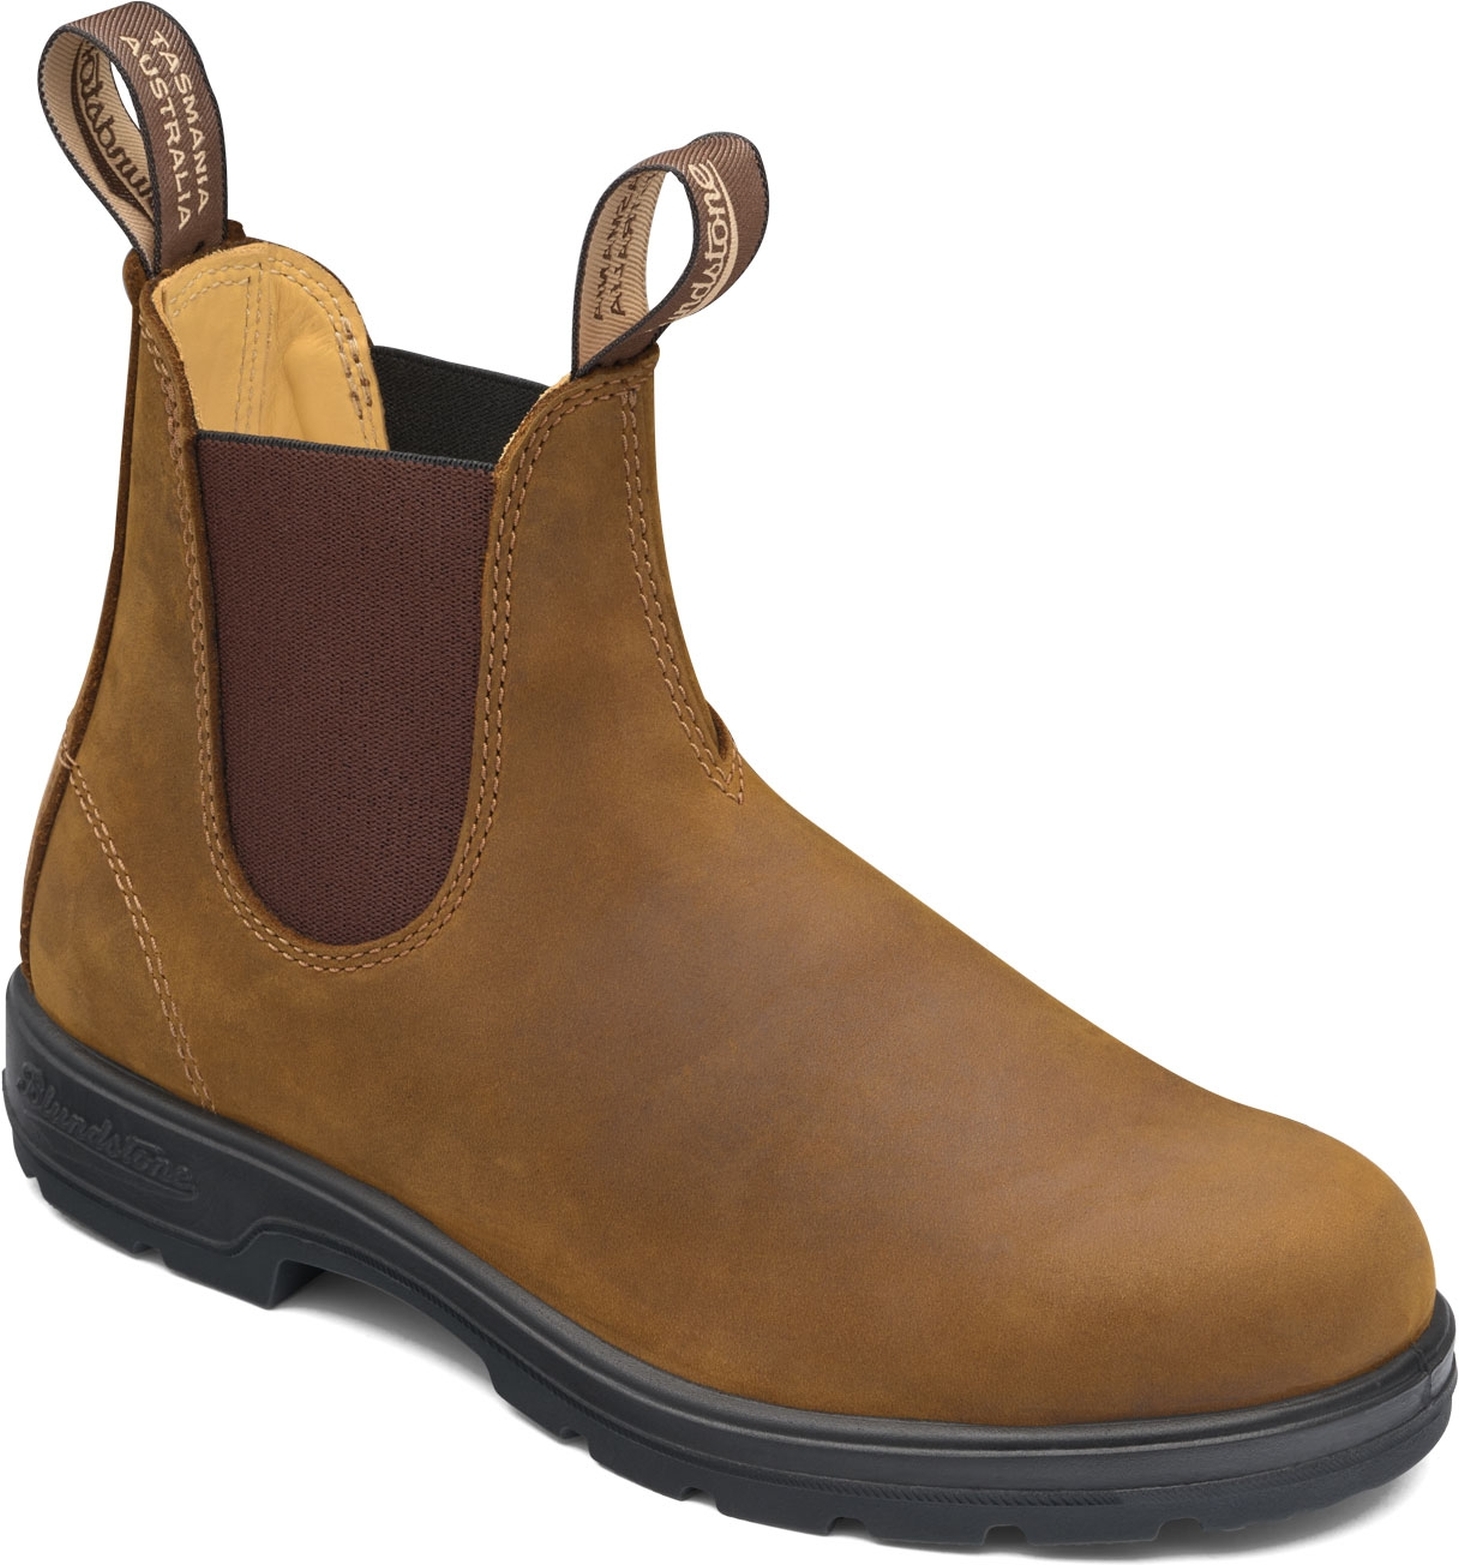 Blundstone 562 Crazy Horse Leather (550 Series) Calf leather